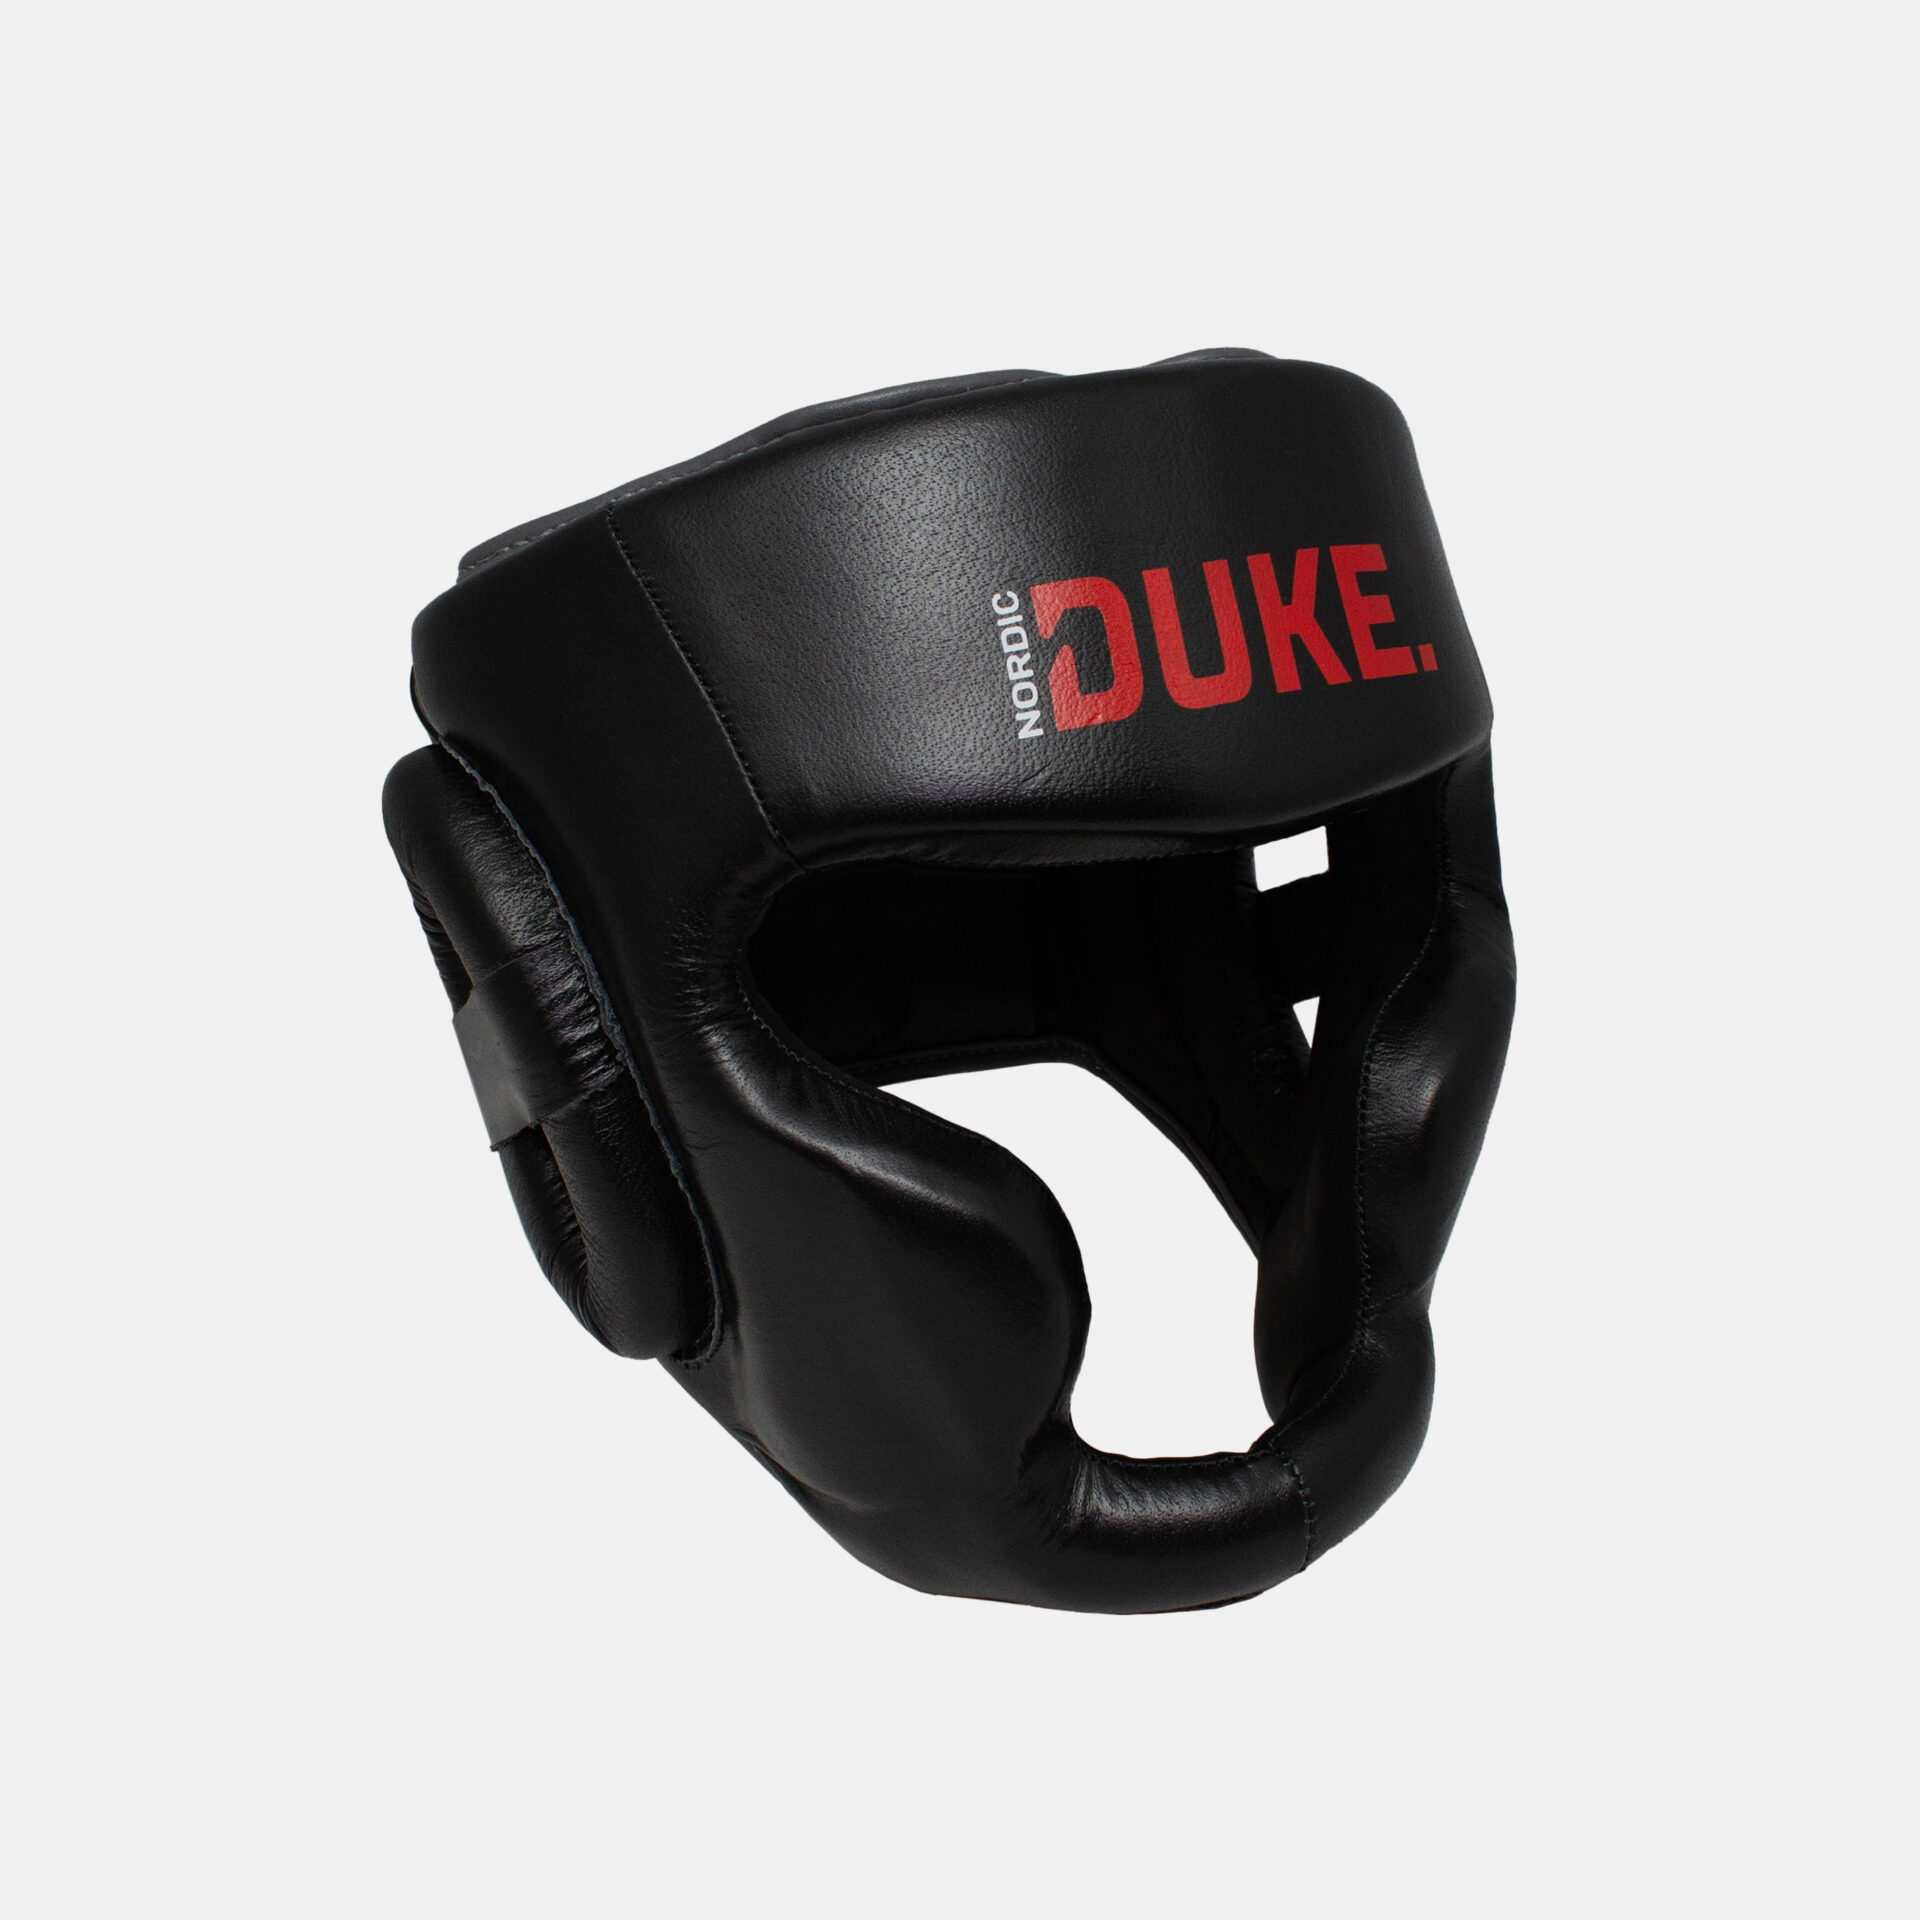 Nordic Duke boxing headguard for boxing and martails arts